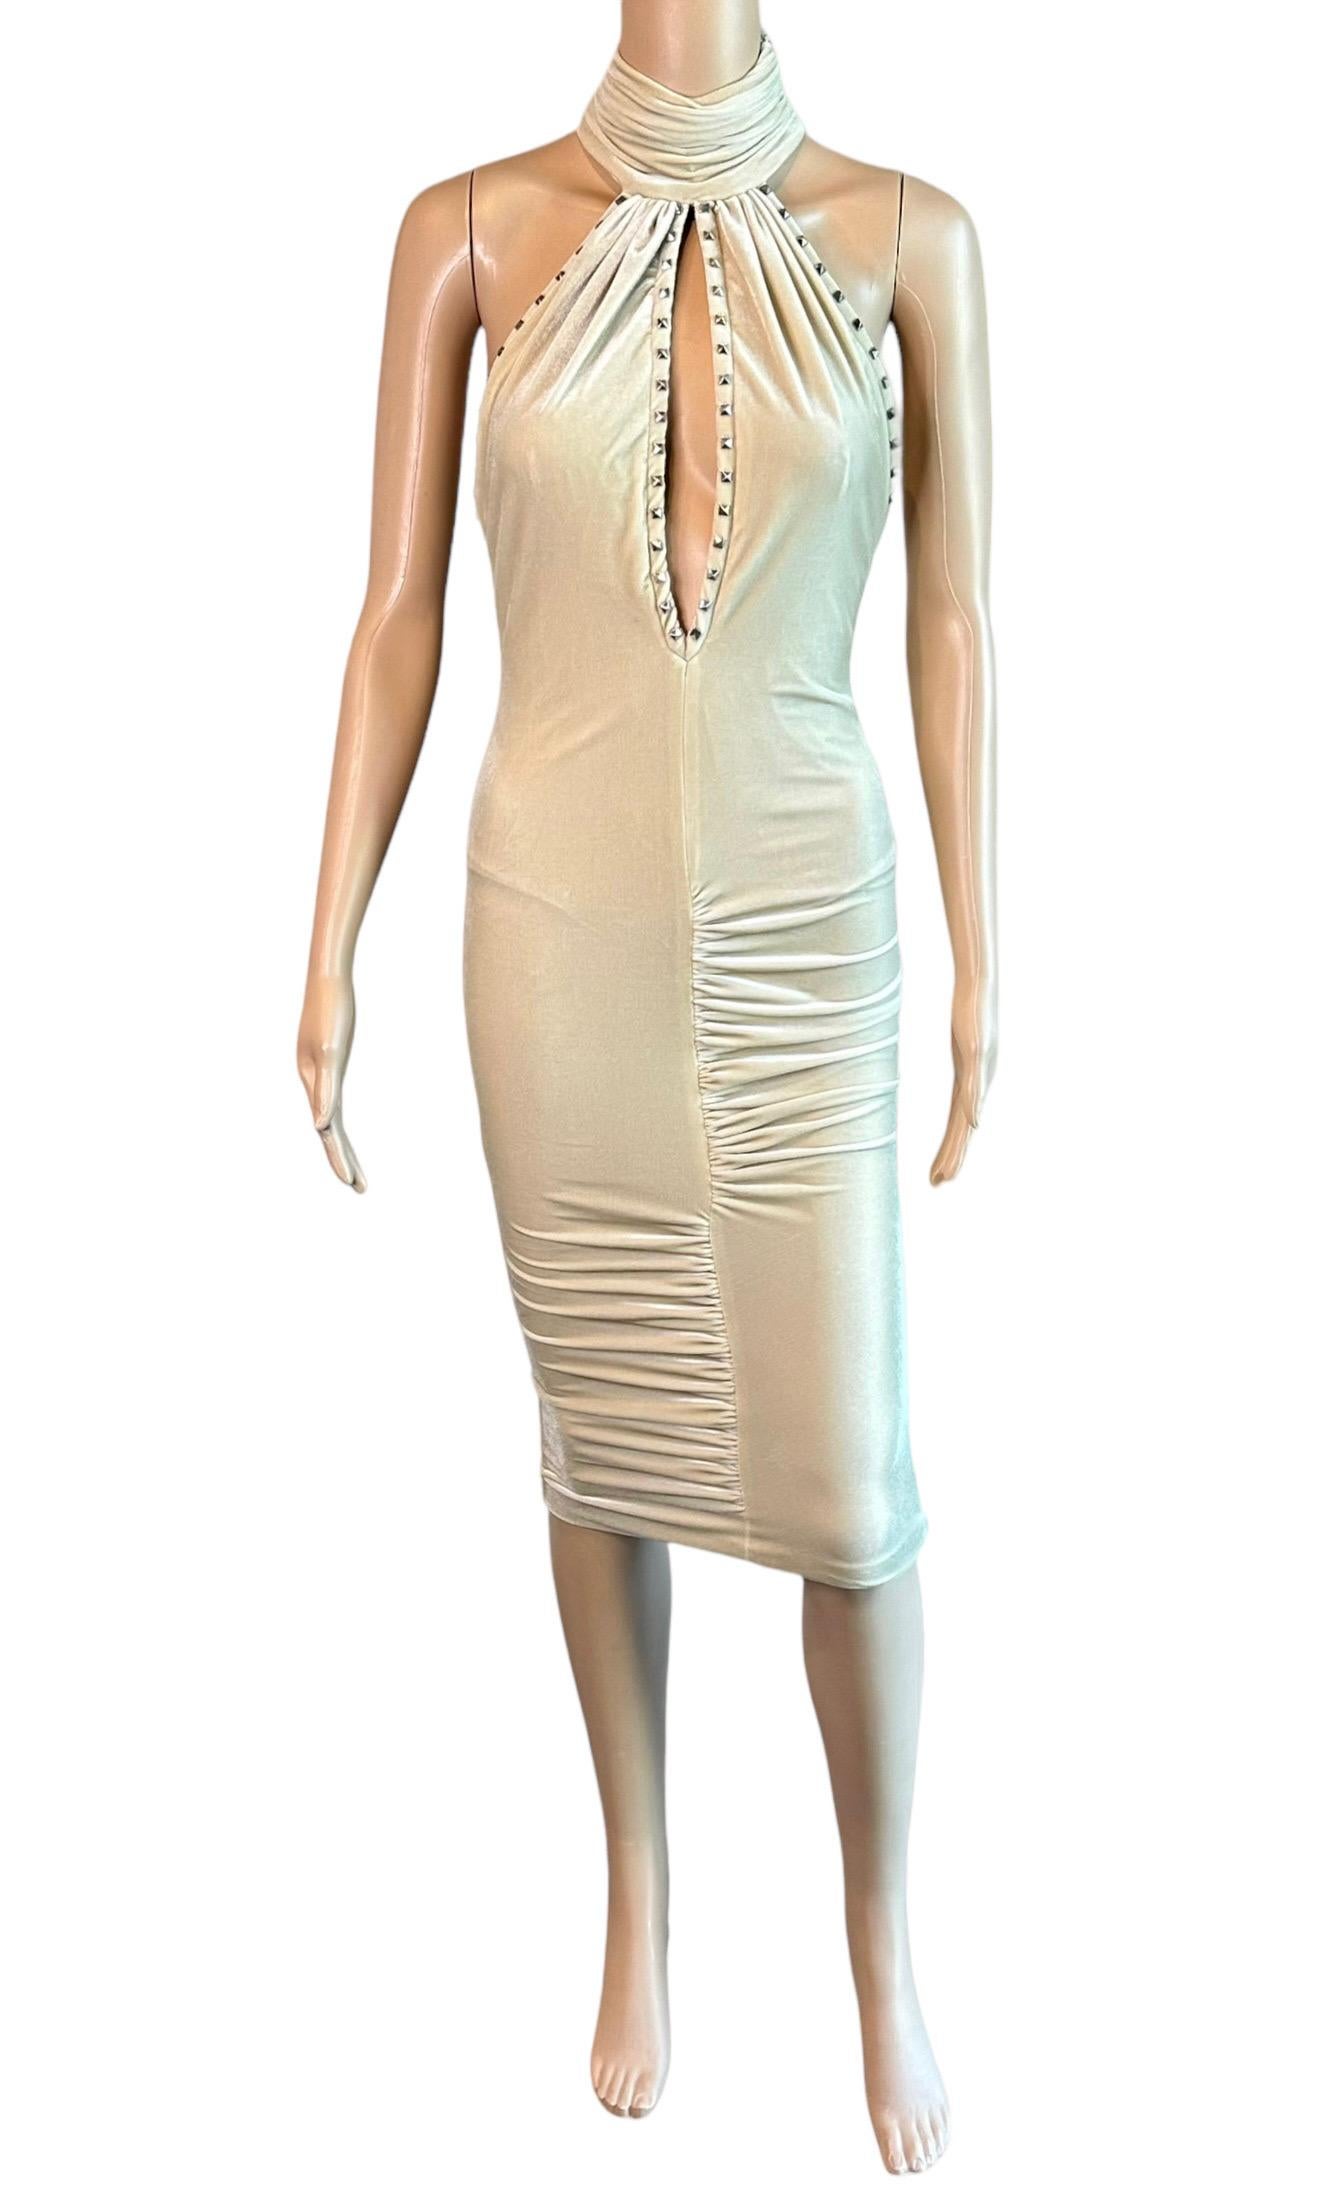 Versace F/W 2004 Runway Unworn Plunging Keyhole Cutout Back Studded Detail Dress For Sale 2